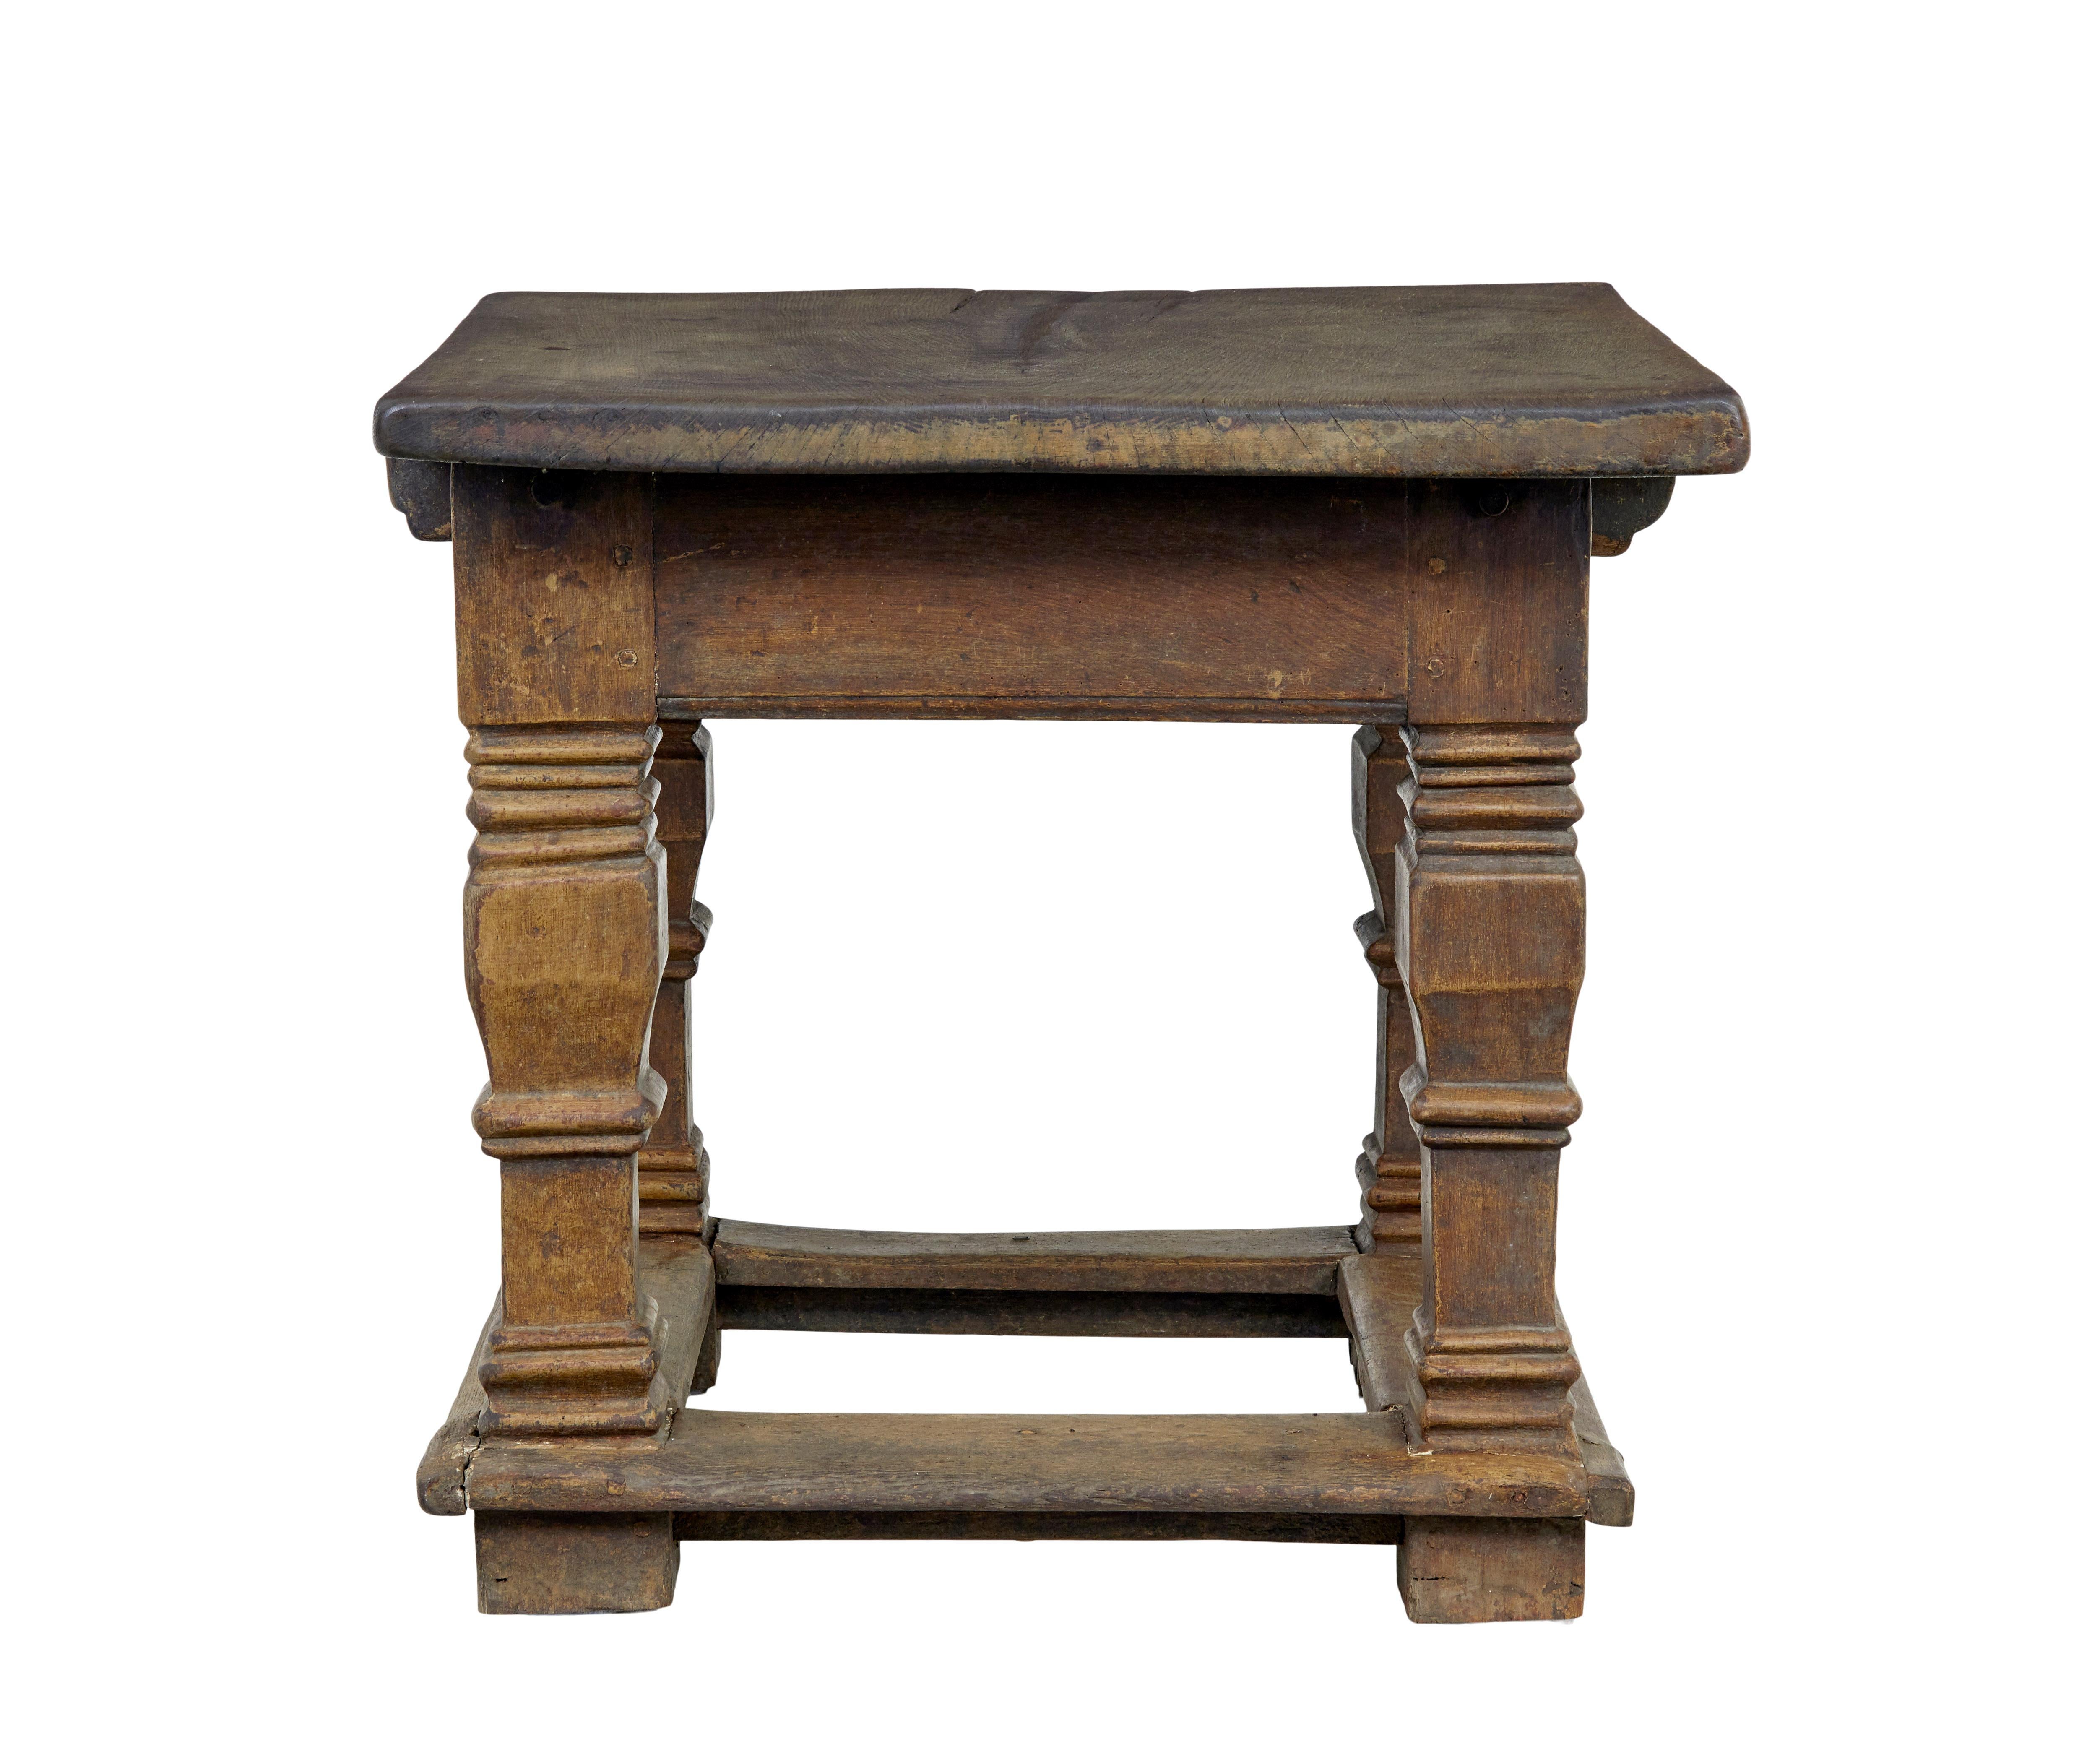 Flemish 17th Century carved oak table For Sale 4